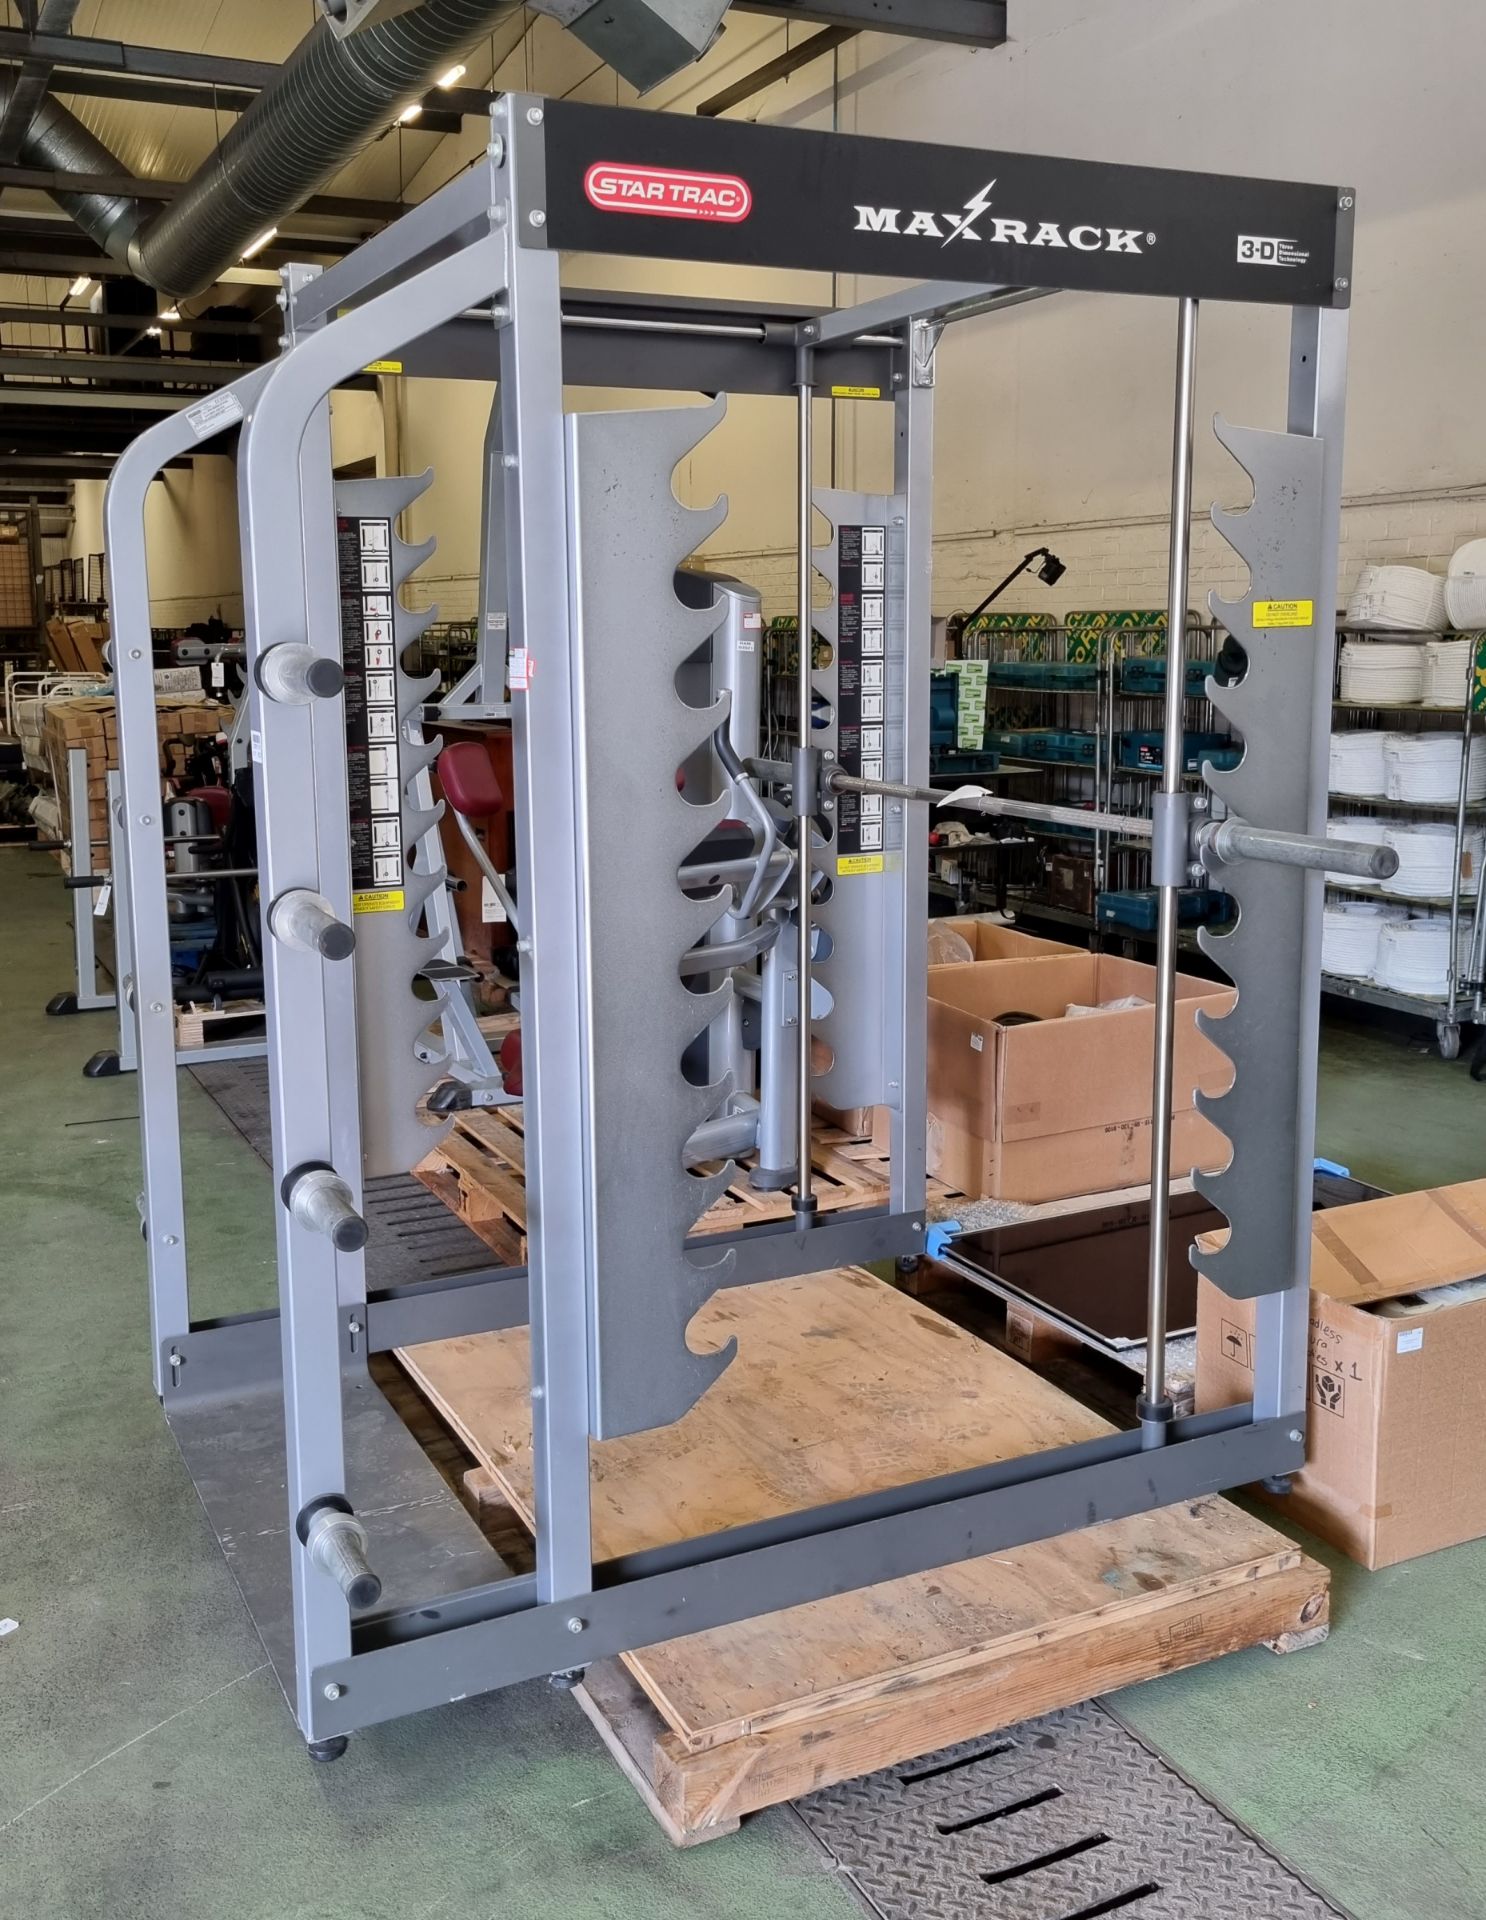 Star Trac Max Rack 3D multi - heavy weight training frame - W 1990 x D 1760 x H 2160 mm - Image 2 of 7